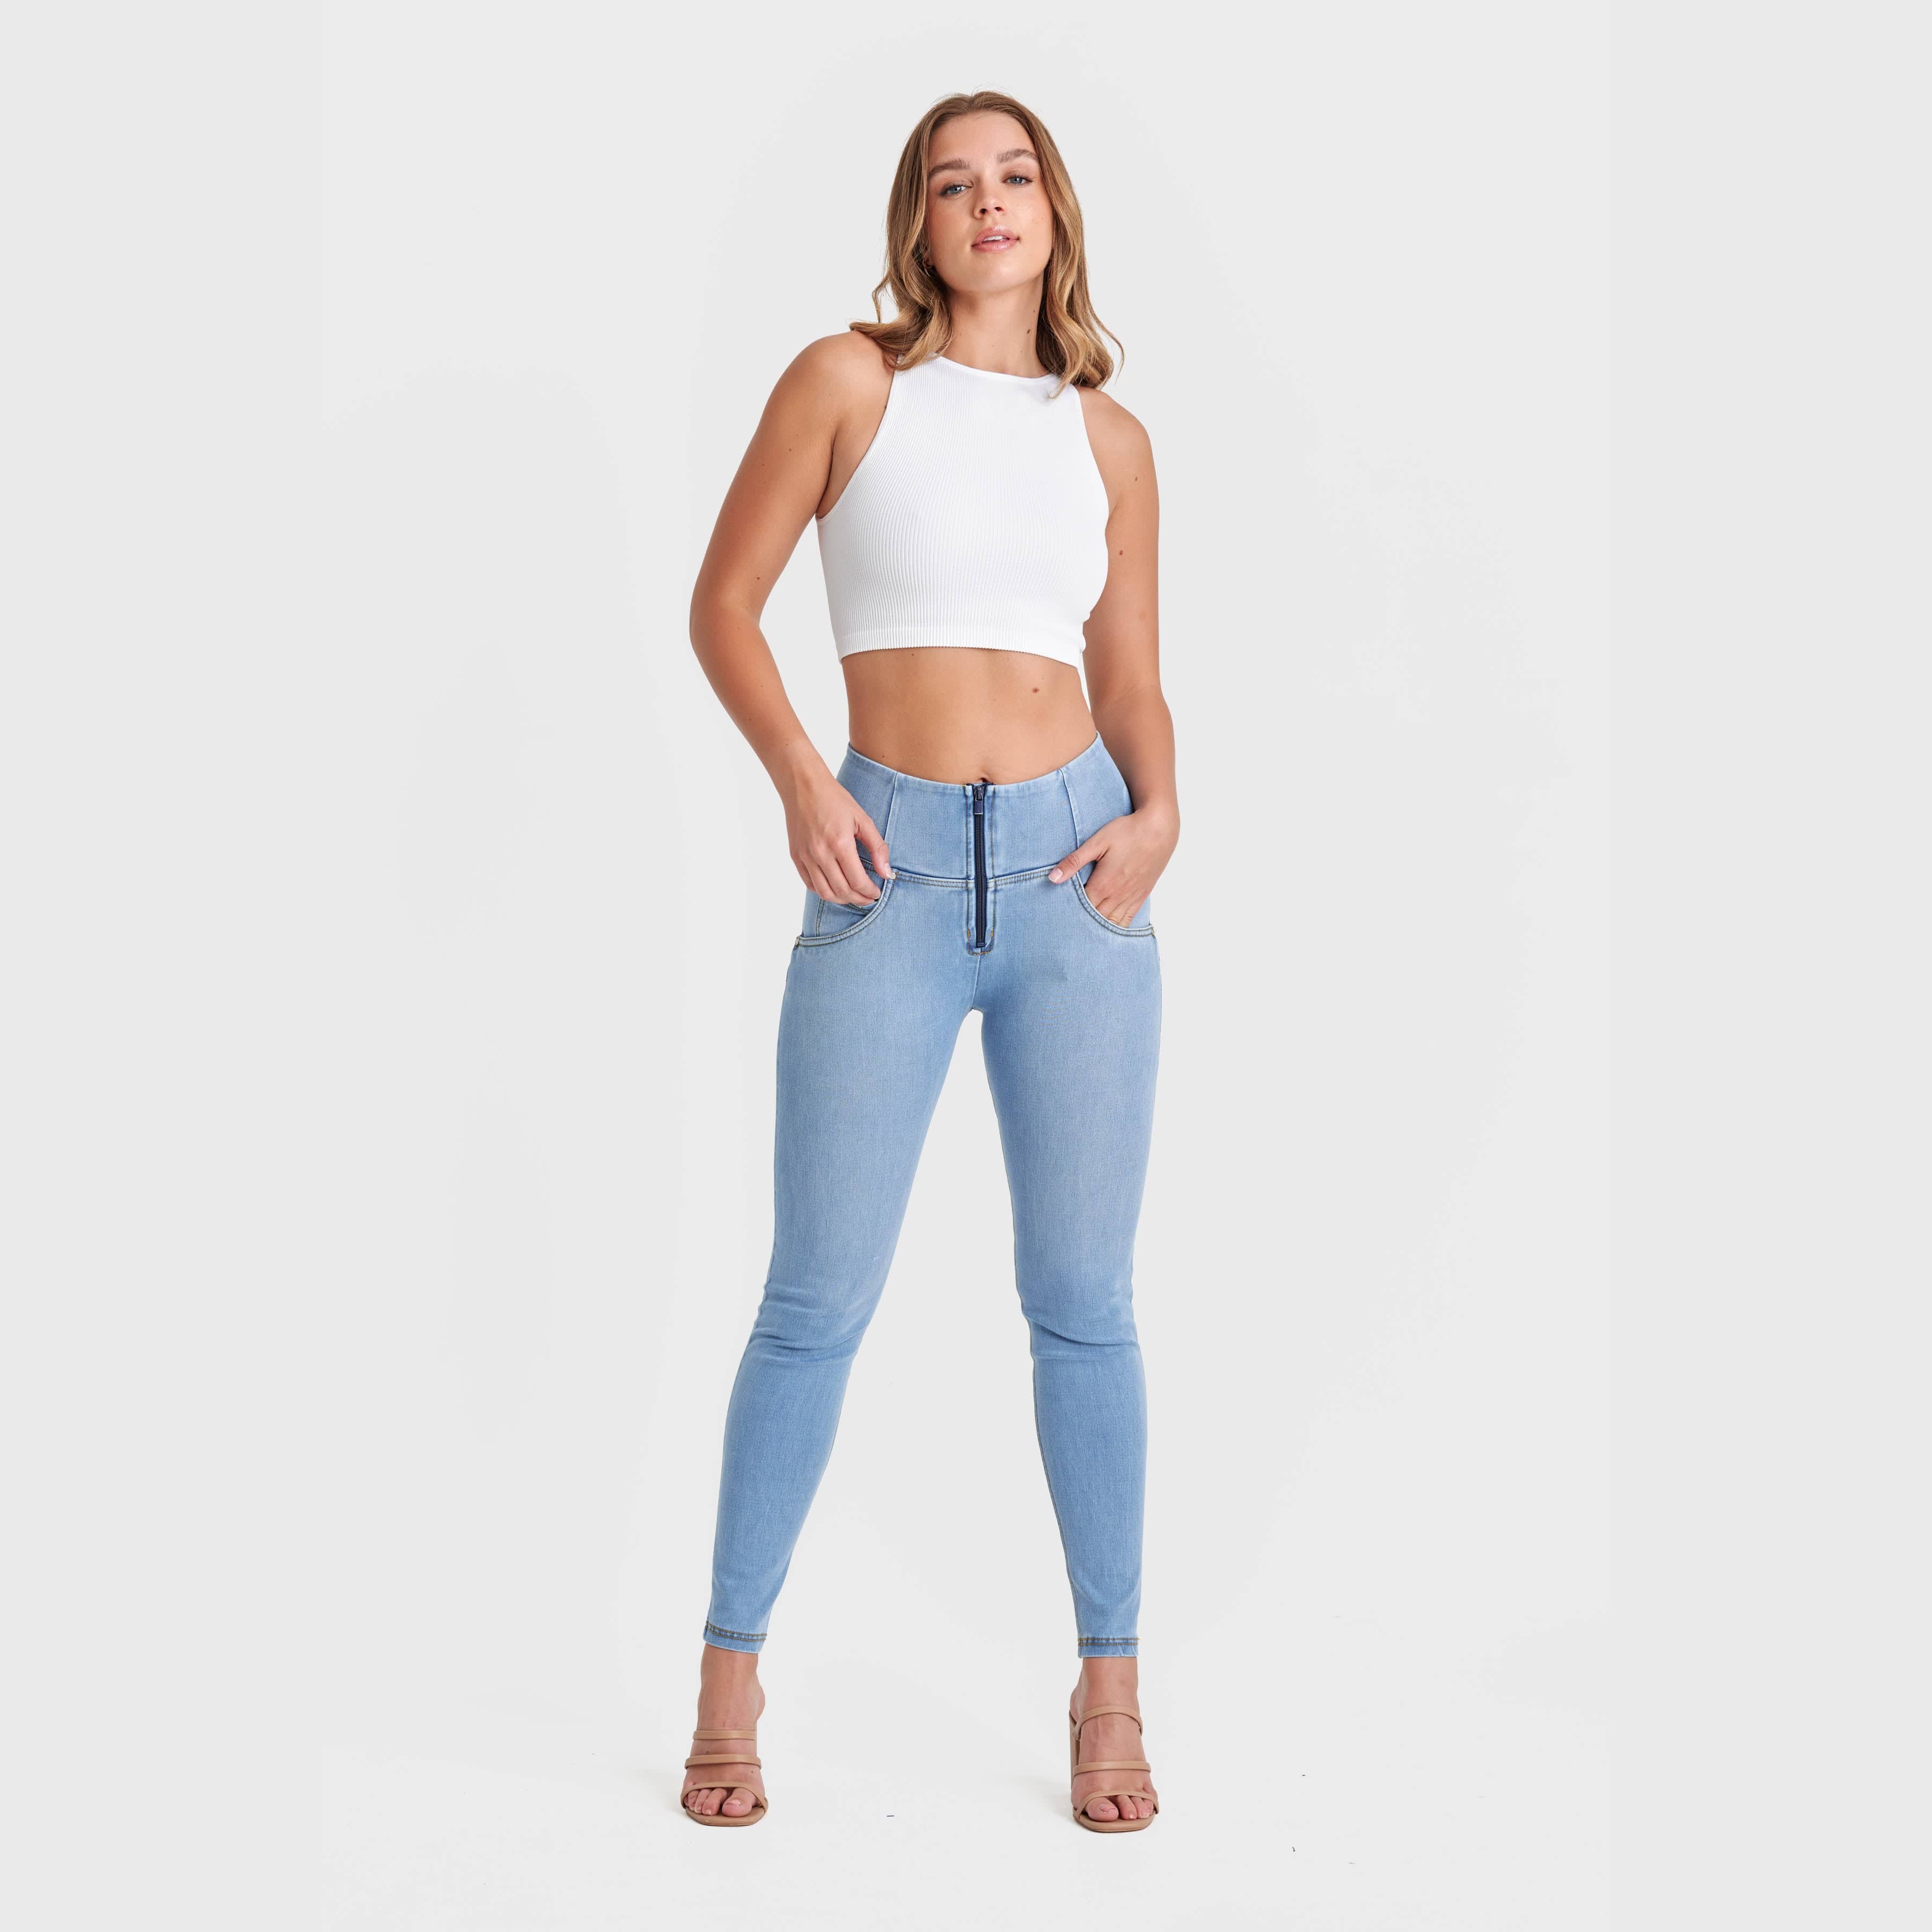 WR.UP® Snug Jeans - High Waisted - Full Length - Light Blue + Yellow Stitching 3